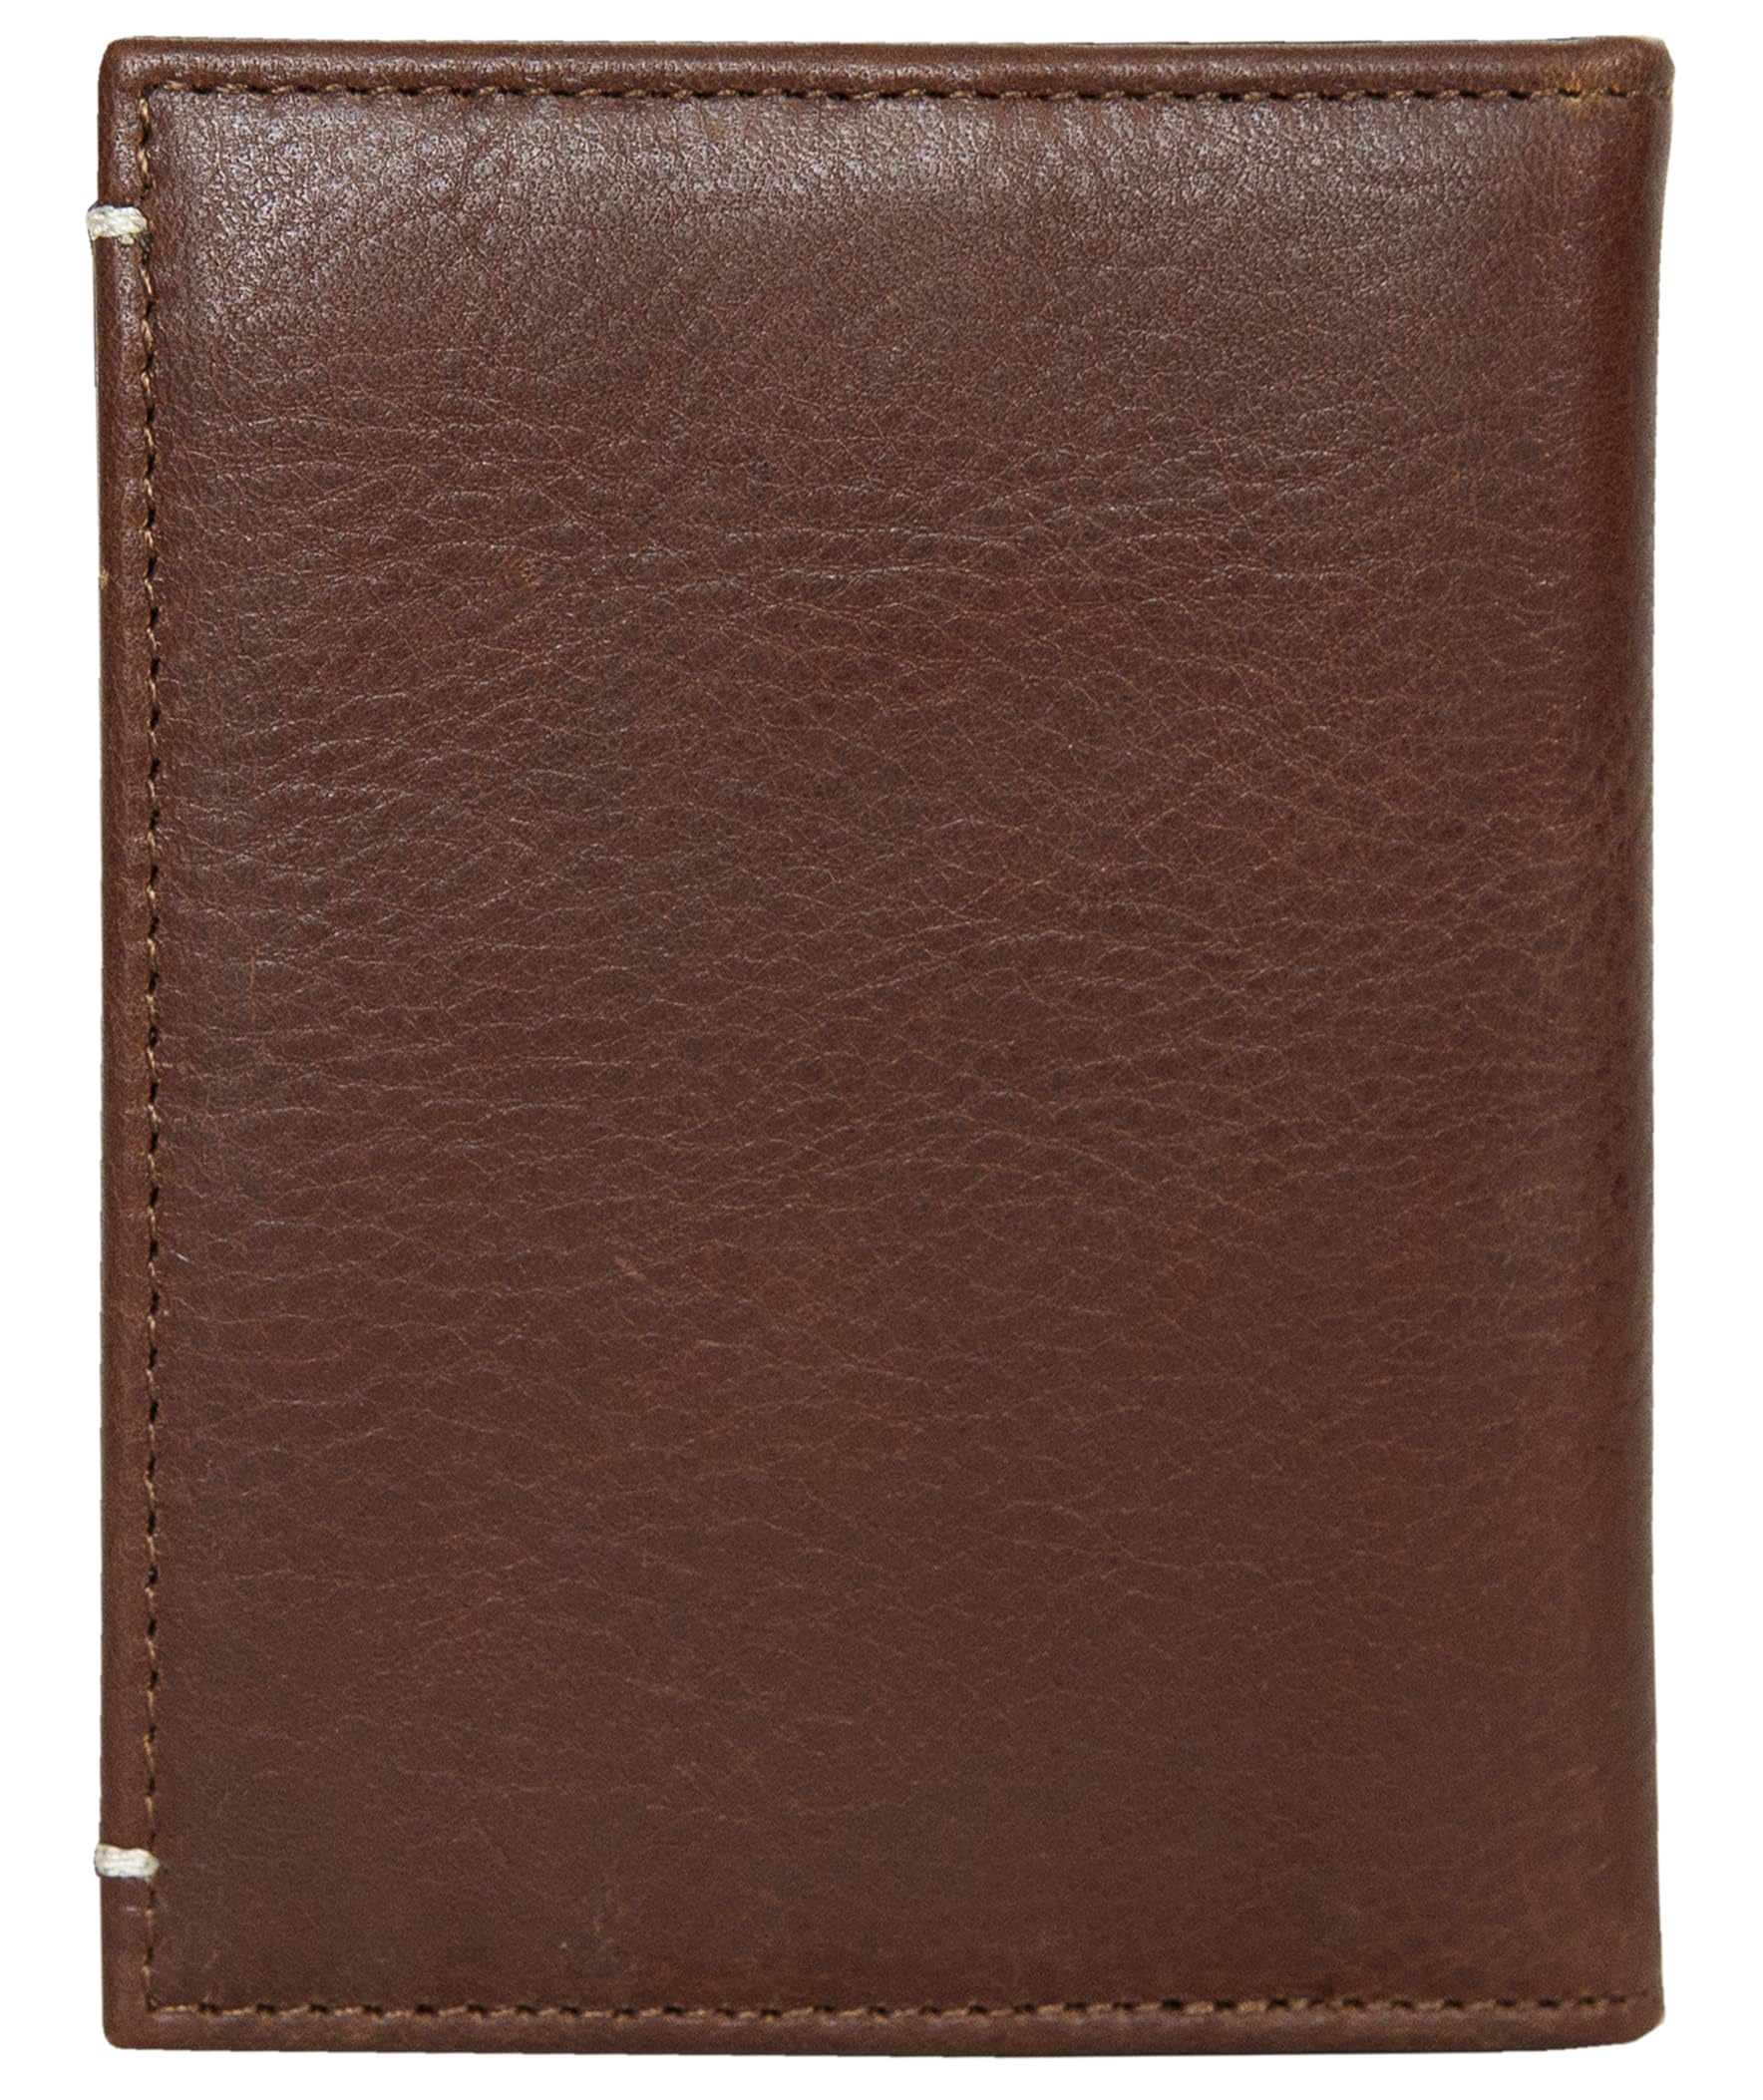 Lucky Brand Men's Smooth Leather L-fold Wallet with RFID Blocking Lining, 9 Card Slots